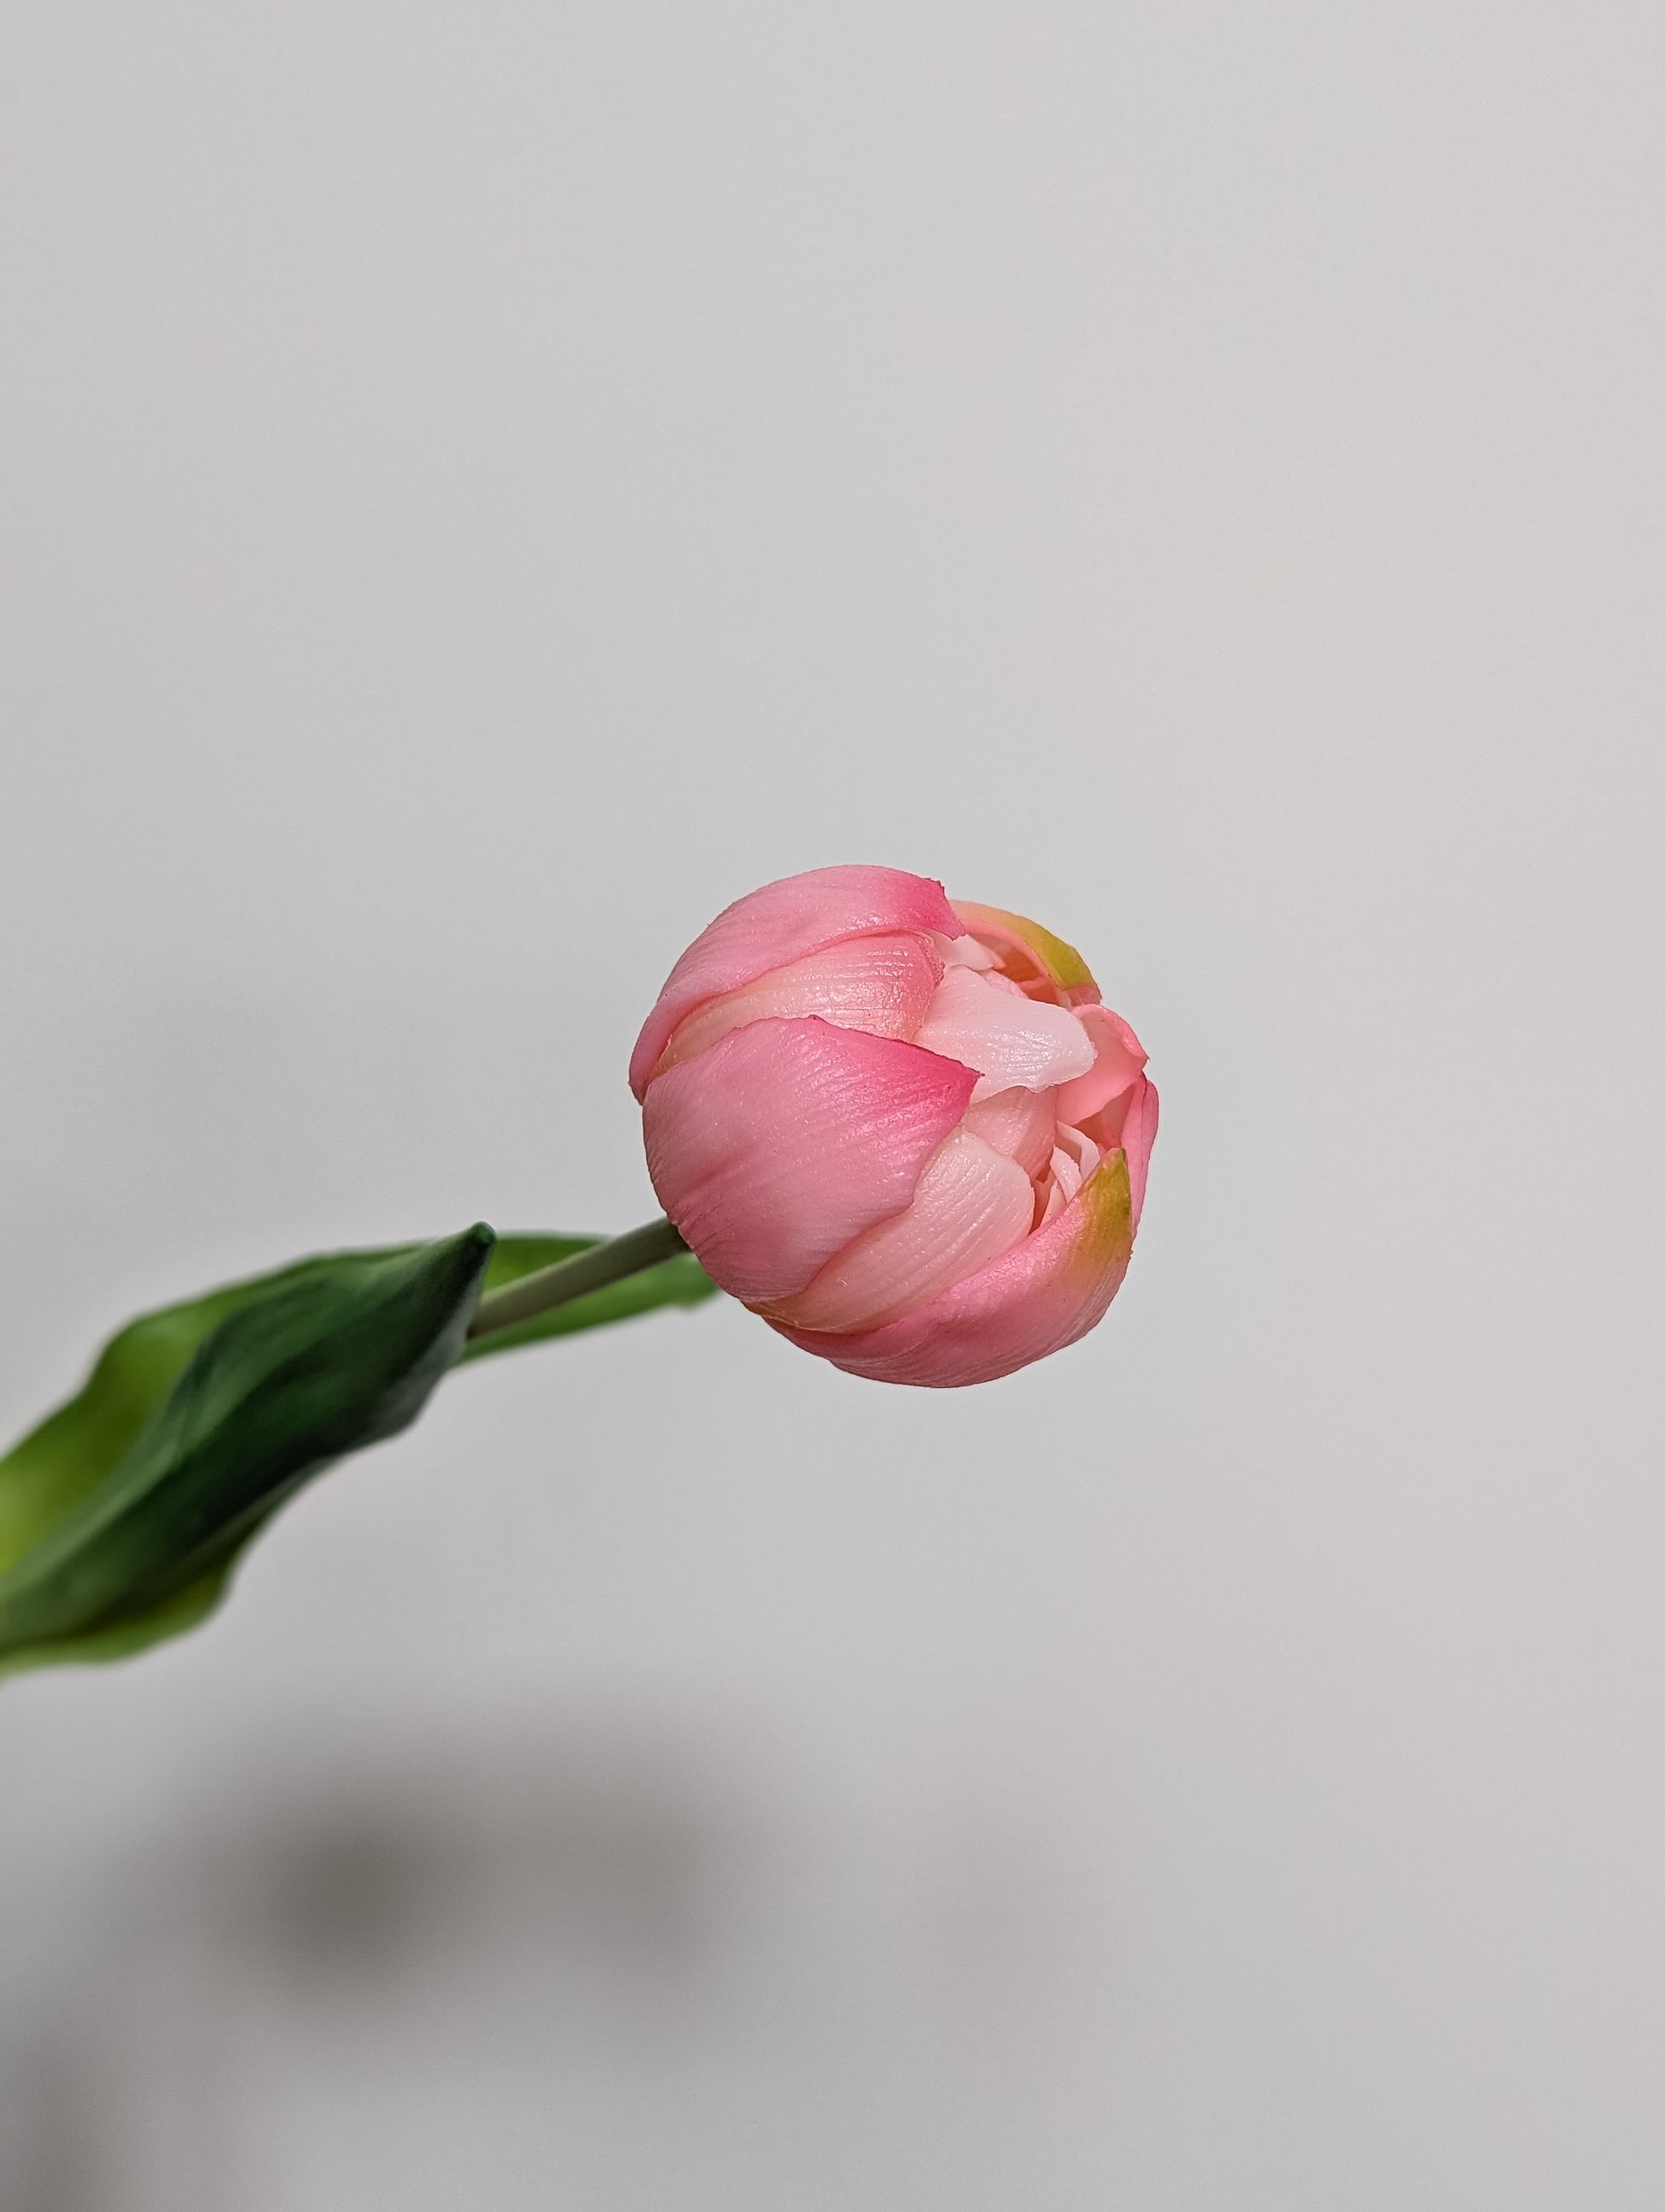 Artificial tulip in pink showing side view to showcase gradients of pink and yellow, mid-bloom, pictured against a white background. 